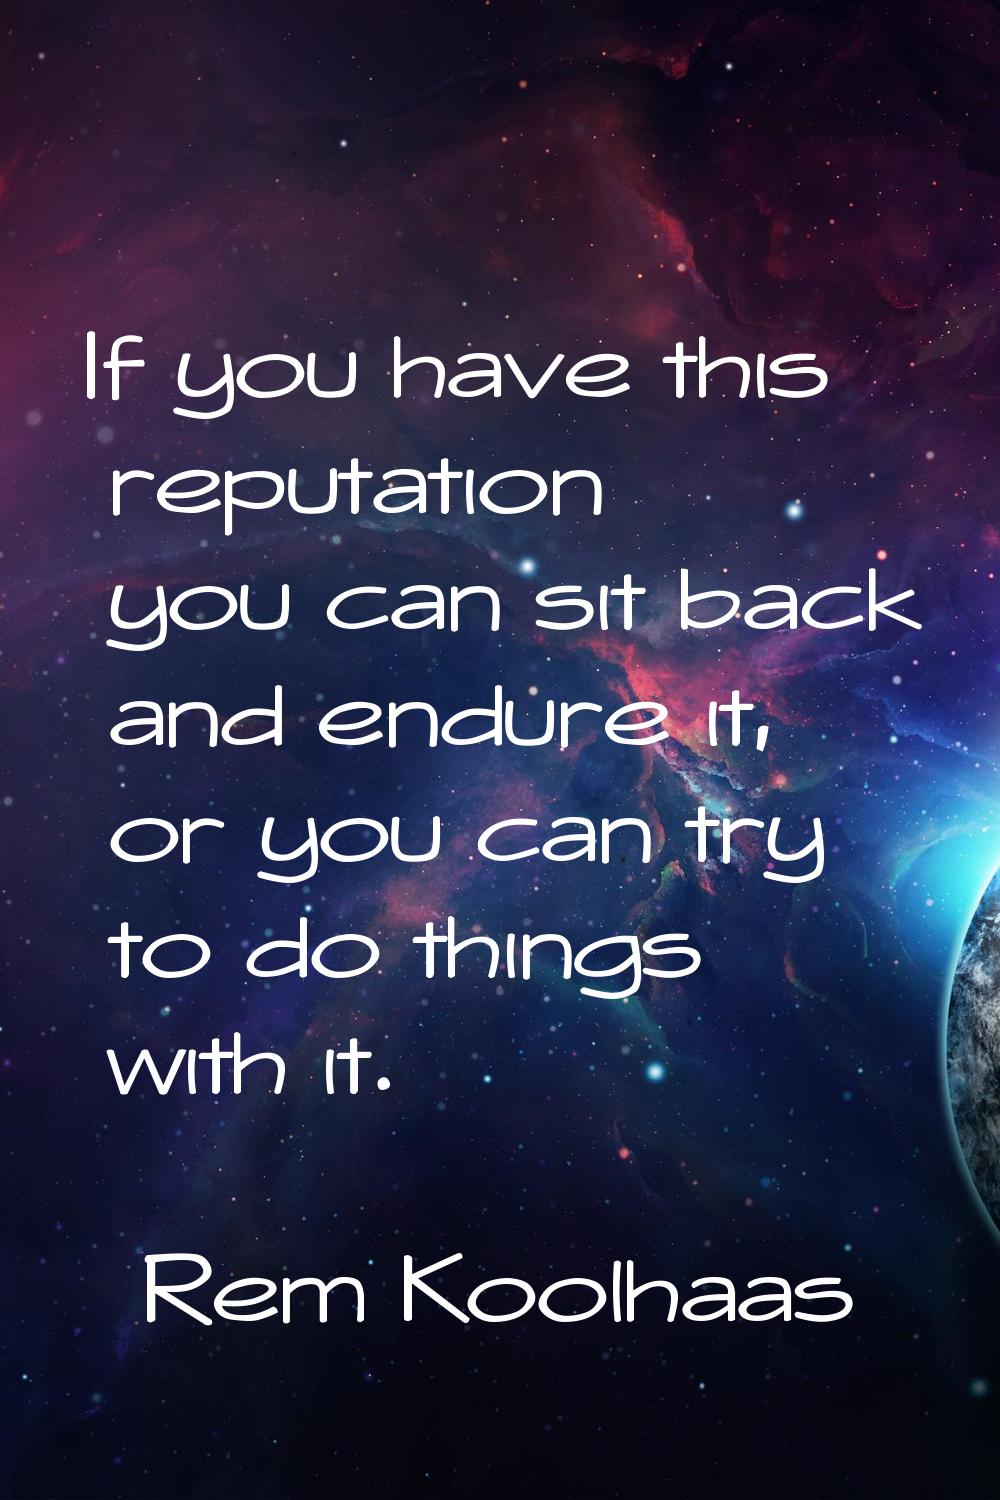 If you have this reputation you can sit back and endure it, or you can try to do things with it.